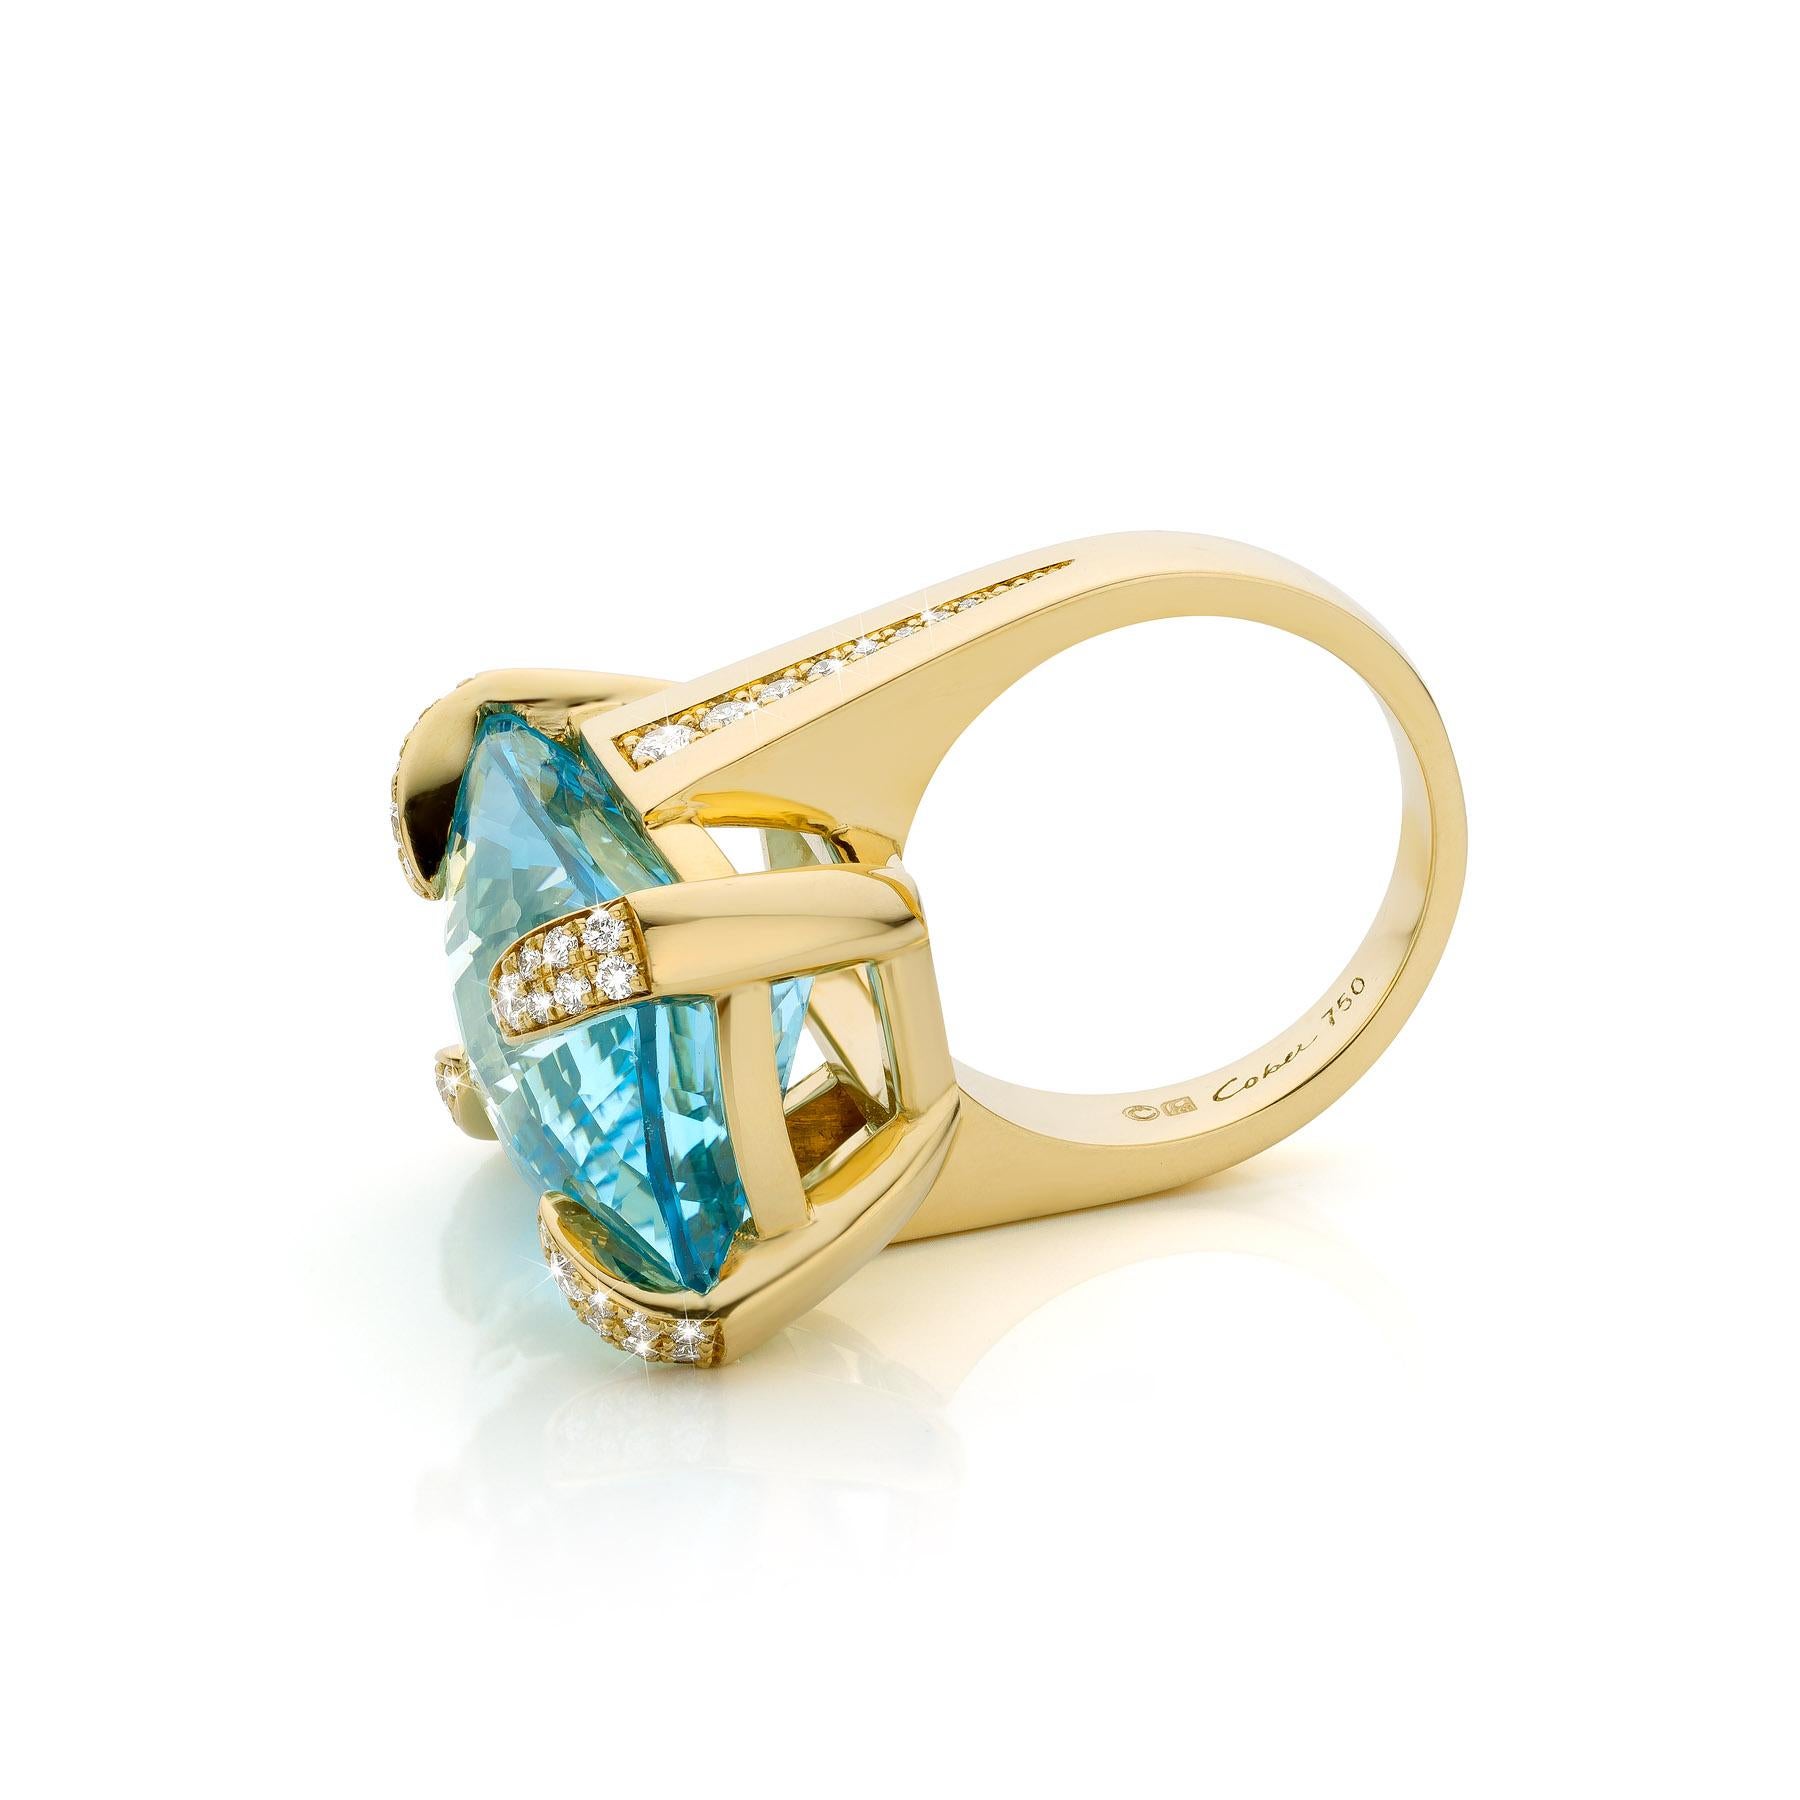 For Sale:  Cober “Skinny Dipping” with 15 Carat Swiss blue Topaz and Diamonds Fashion Ring  4